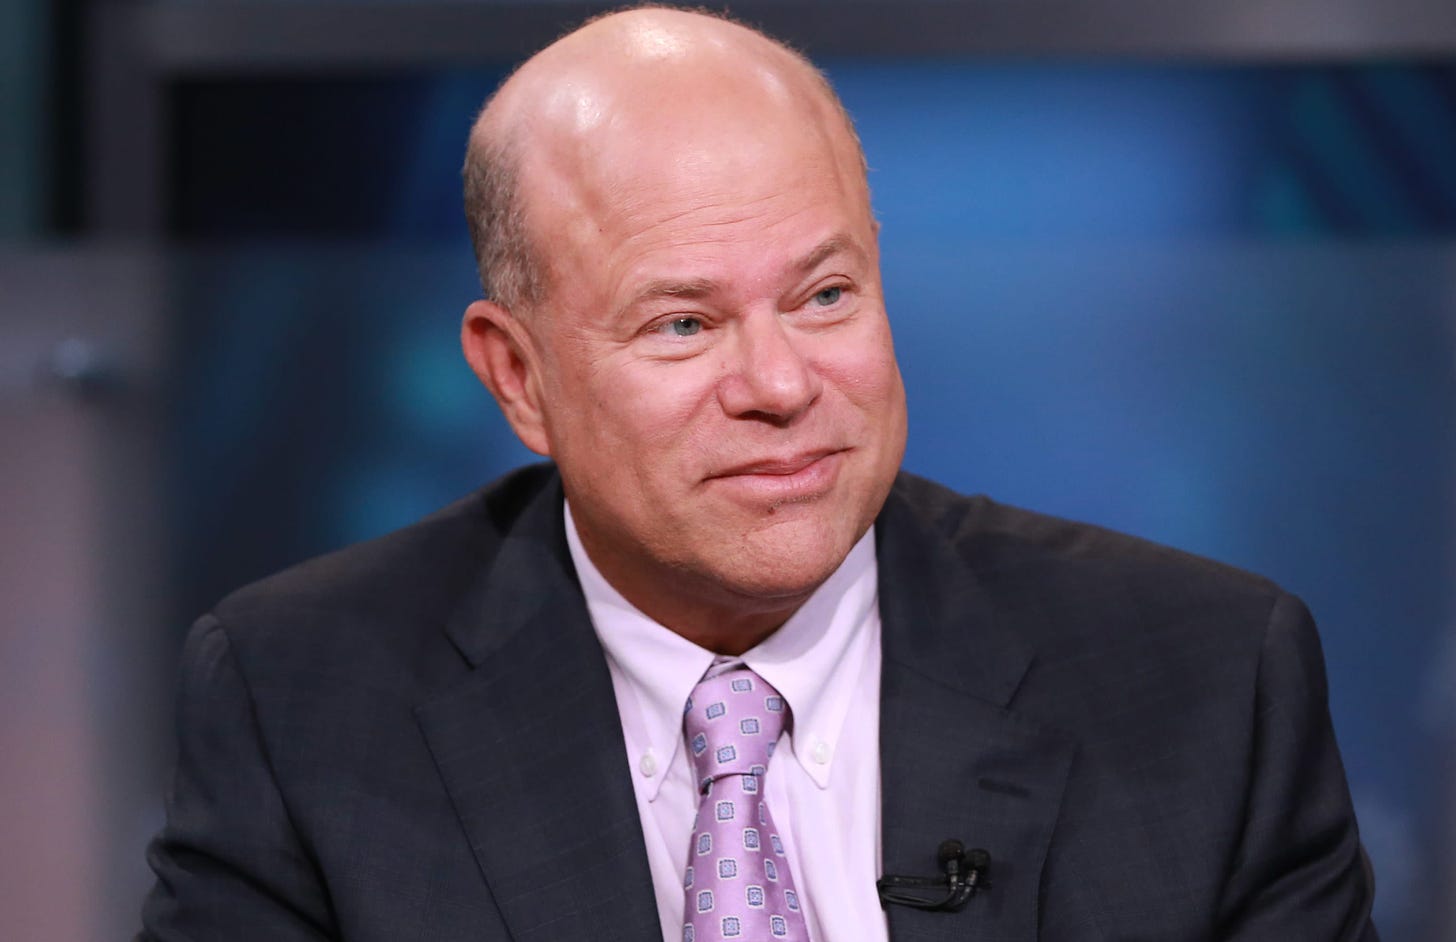 Tepper's Appaloosa hedge fund piles into host of A.I.-related stocks